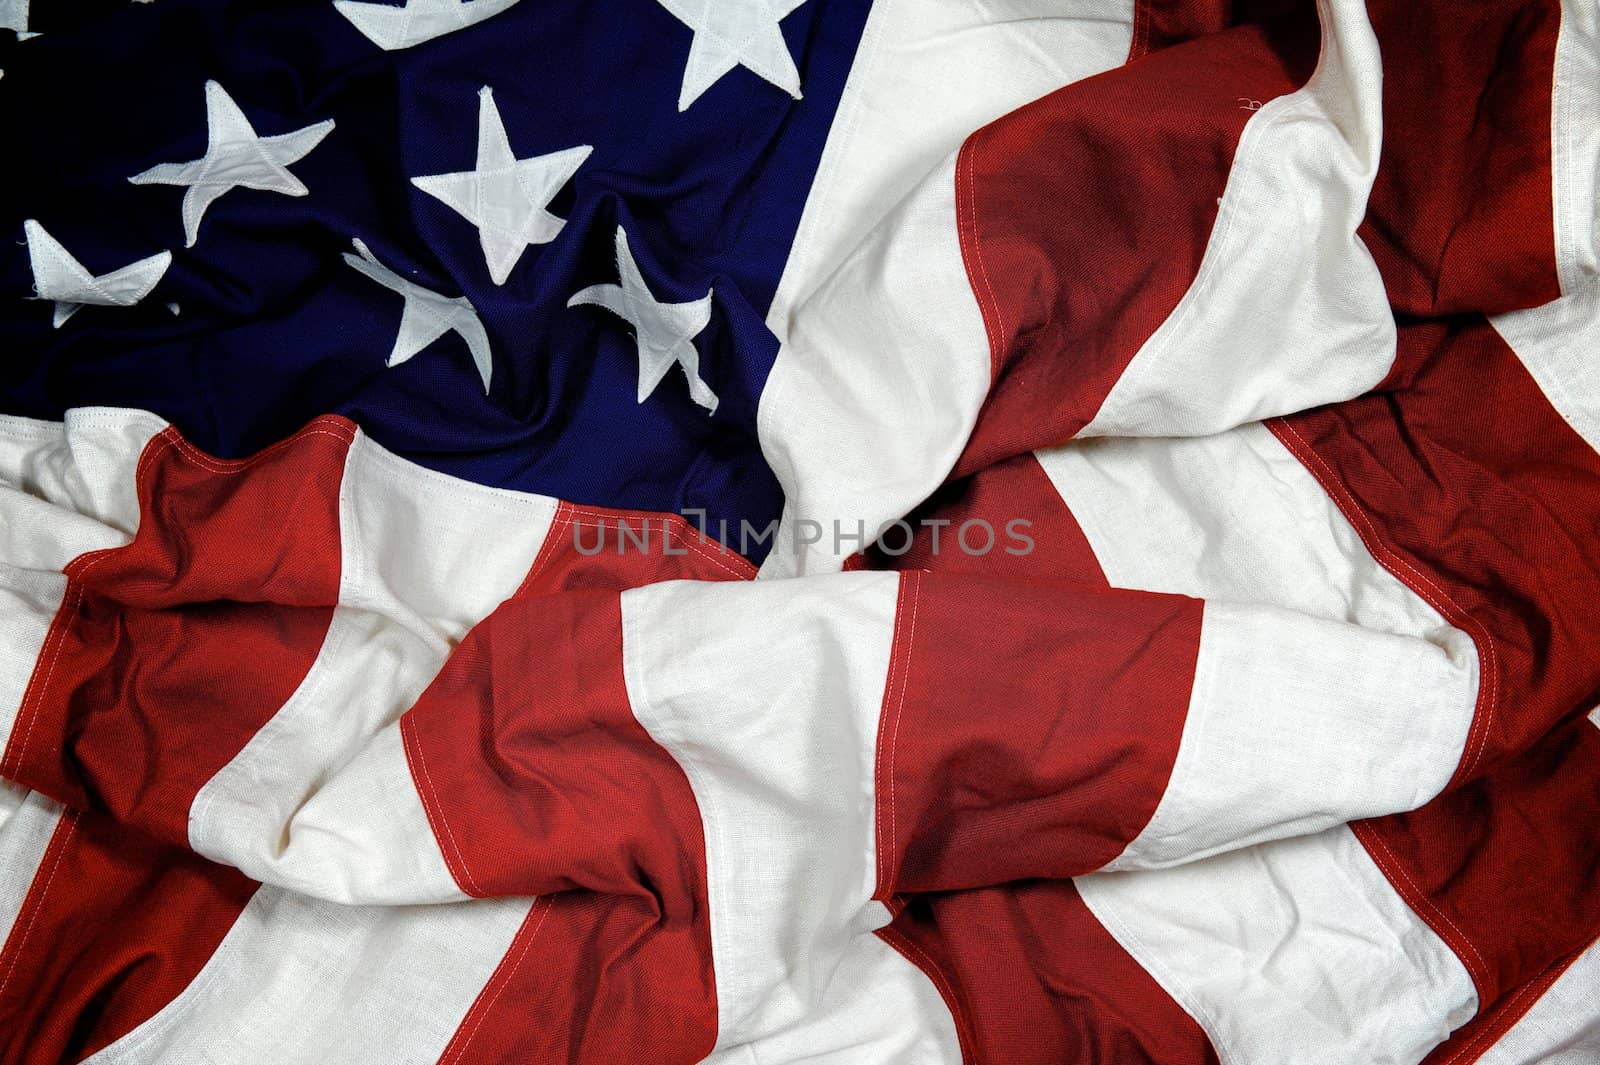 A crumpled American flag with muted tones